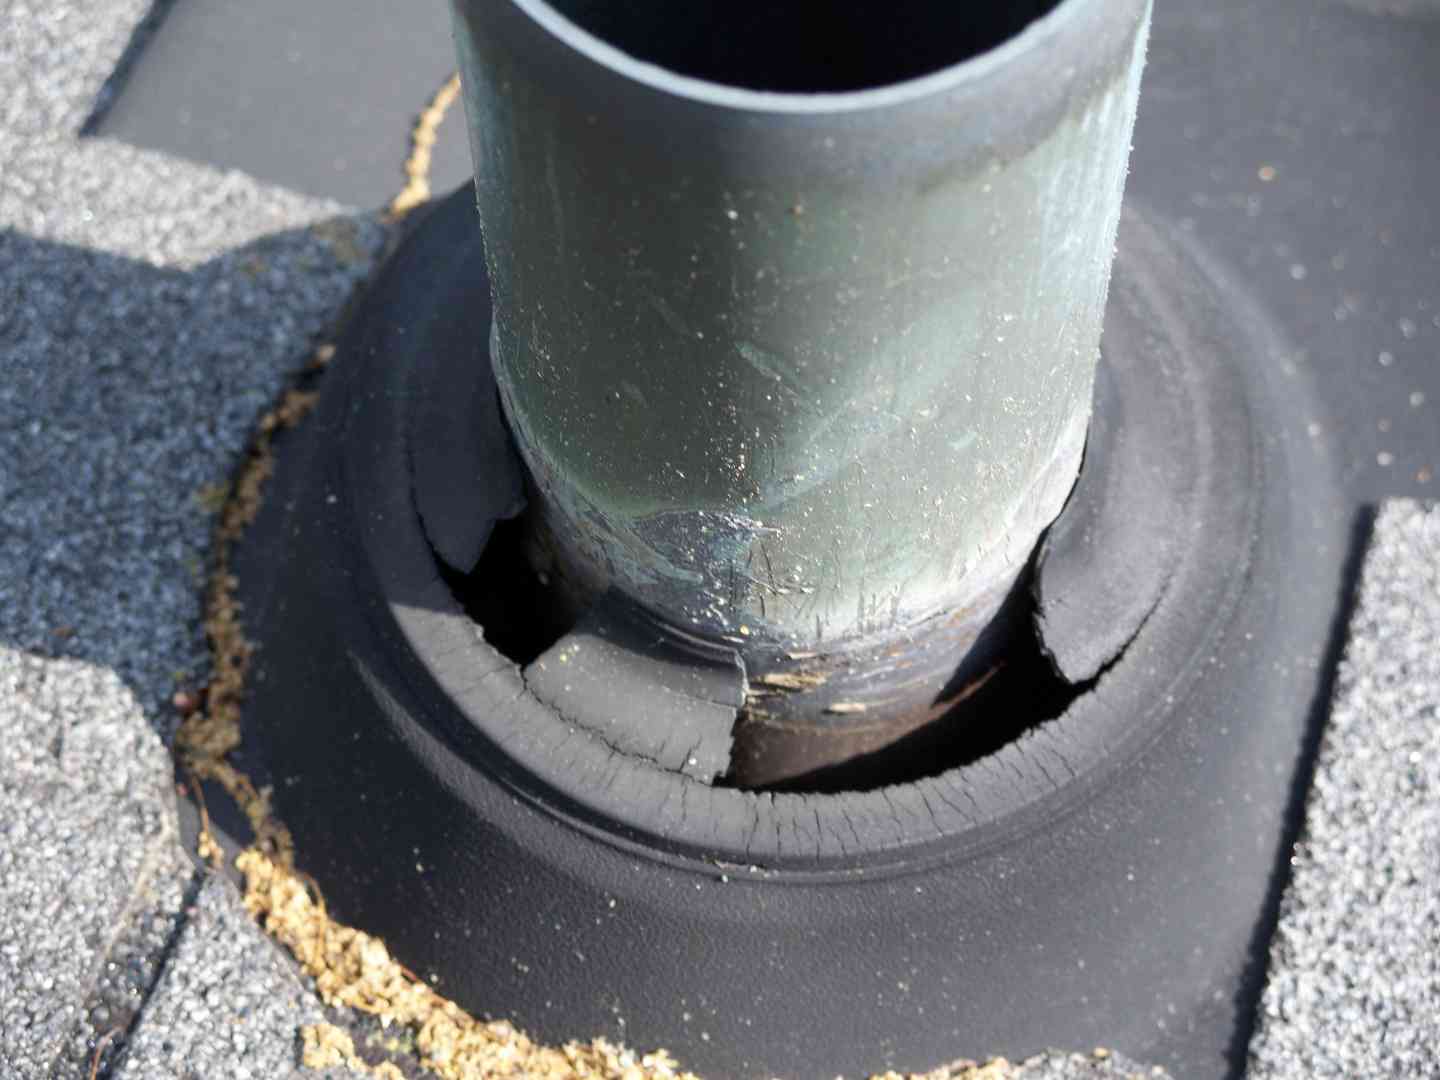 A boot collar where decay has caused holes in the collar